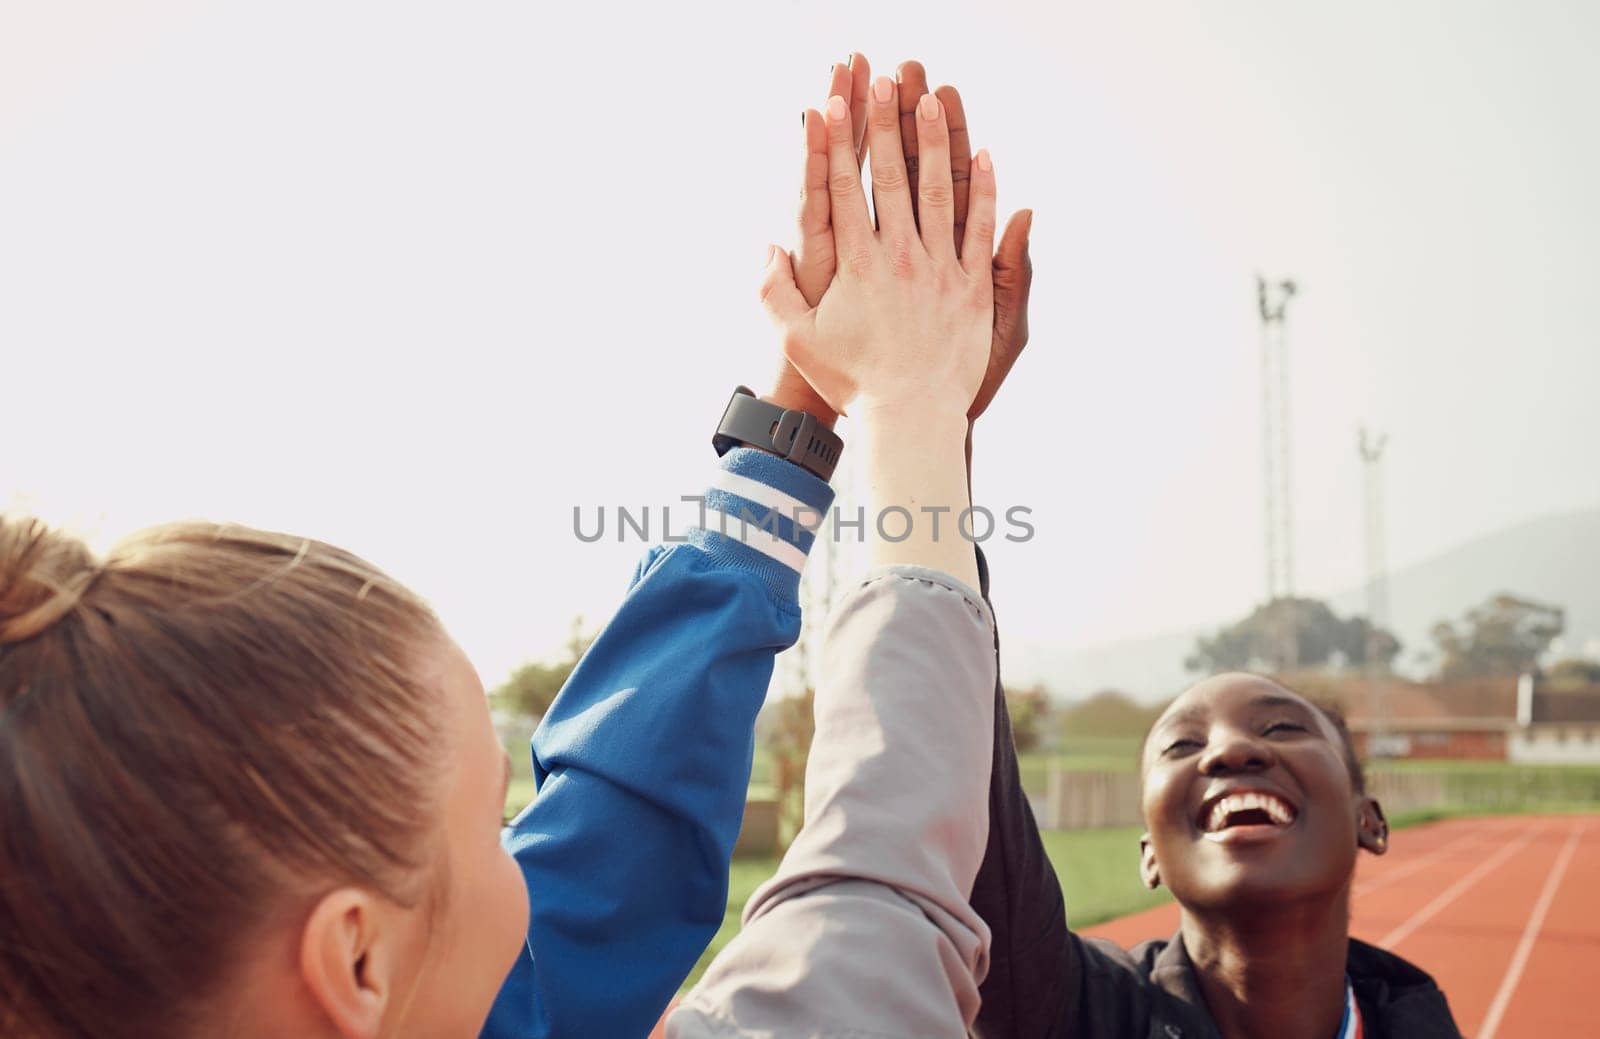 People, diversity and high five in fitness for teamwork, unity or trust together on stadium track. Happy athlete group touching hands in team building for sports motivation, support or goals outdoors.